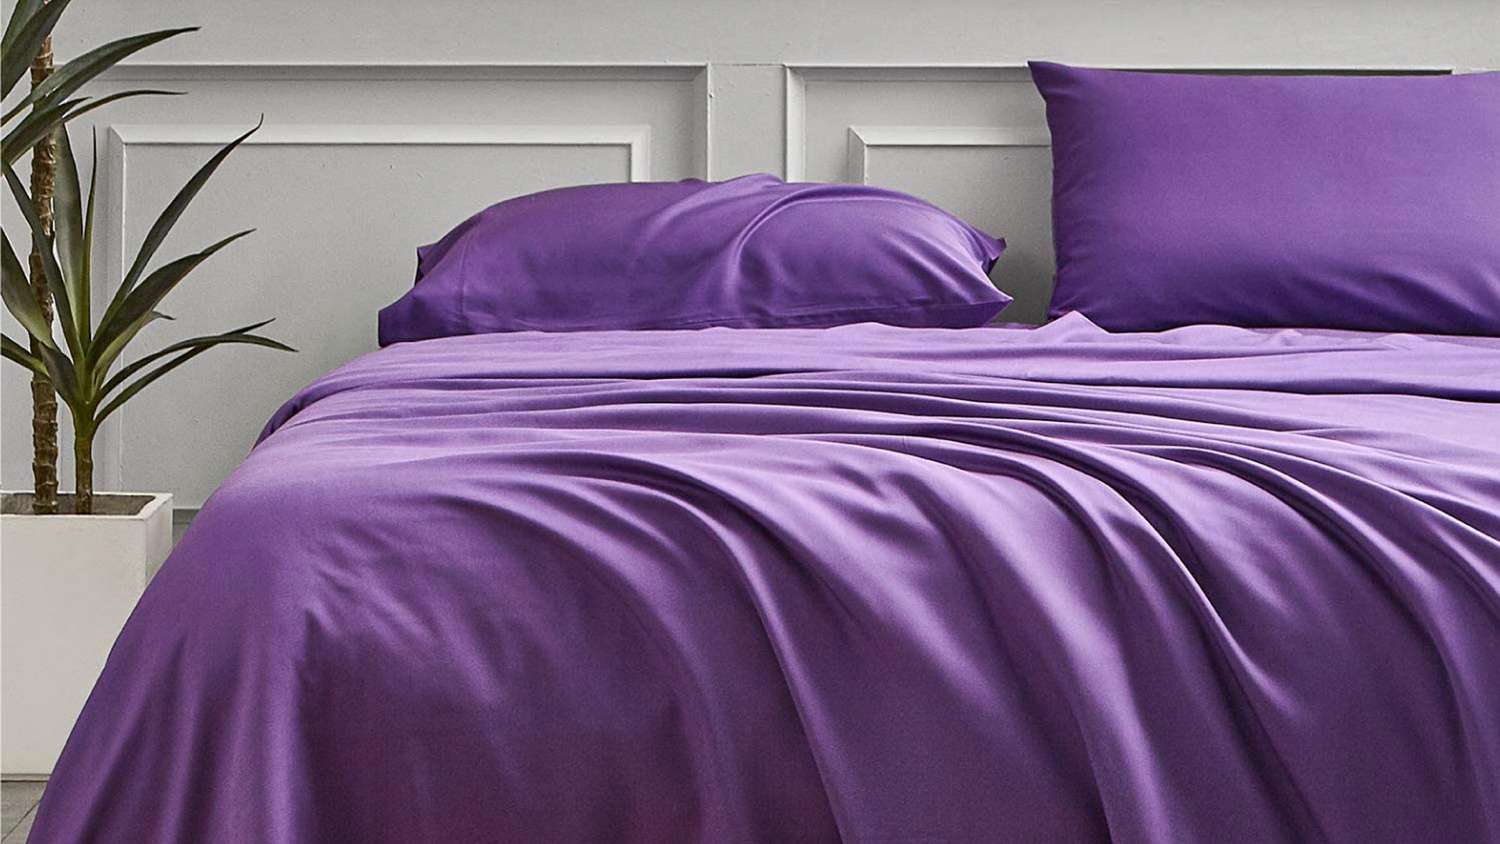 Luxury 100% Viscose Bamboo Cool Softest Bed Sheets and Pillow Cases Deep Pocket 